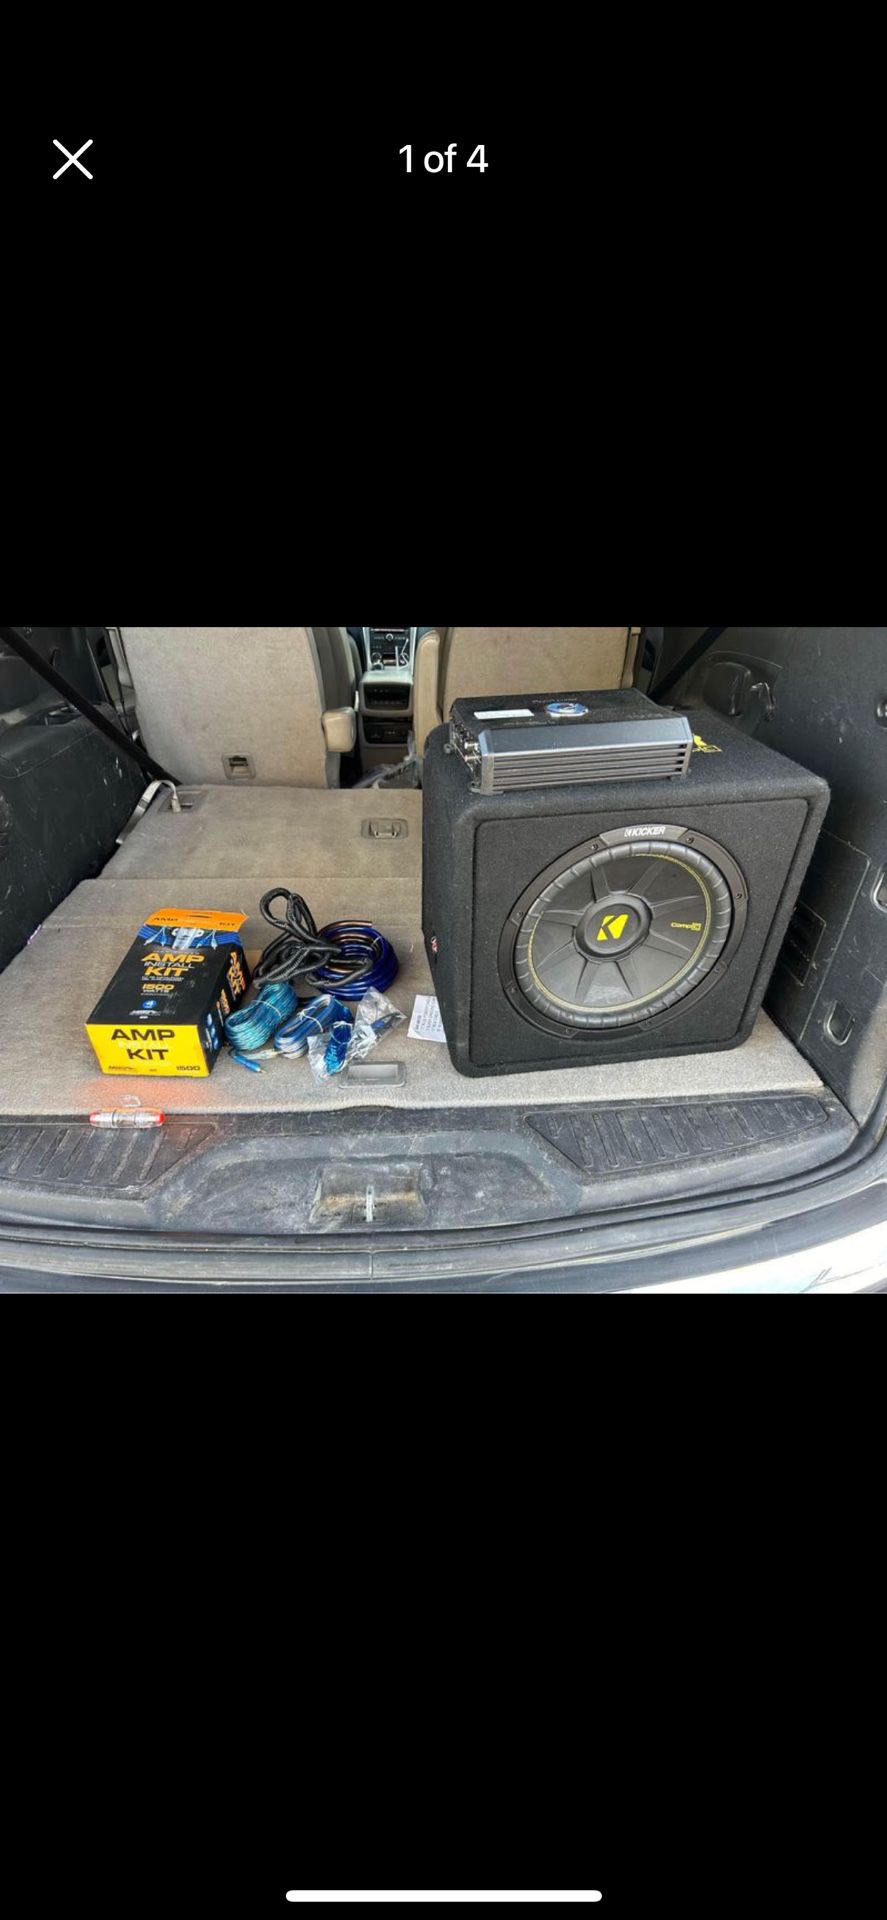 12’ Subwoofer And A 1500 Watt Amp With All The Wires 